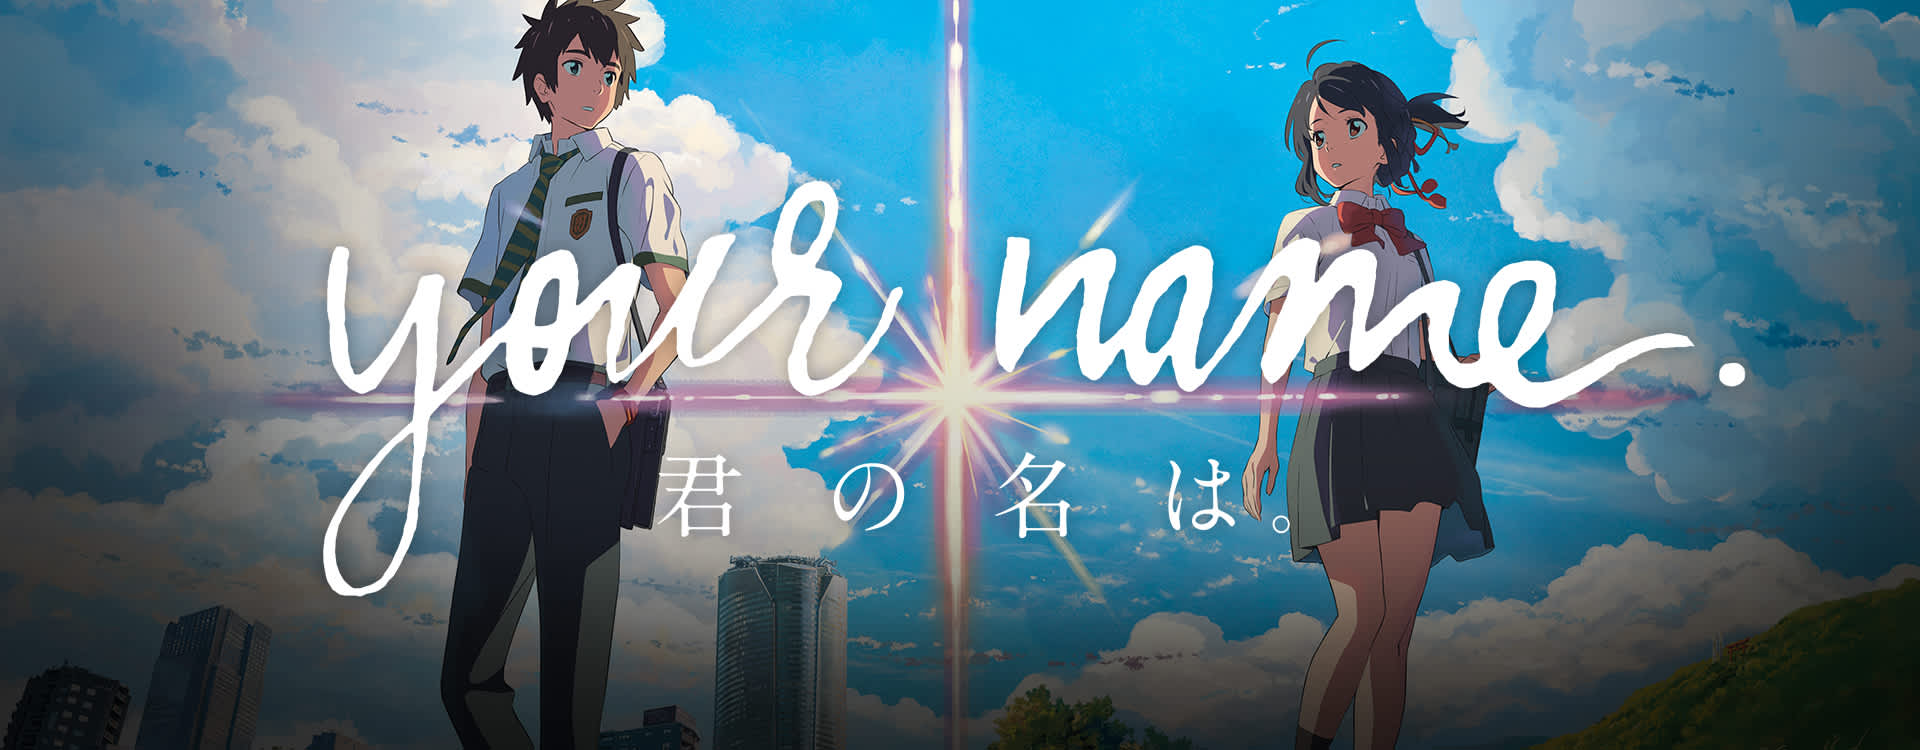 Images Of Anime Movie Your Name In Hindi